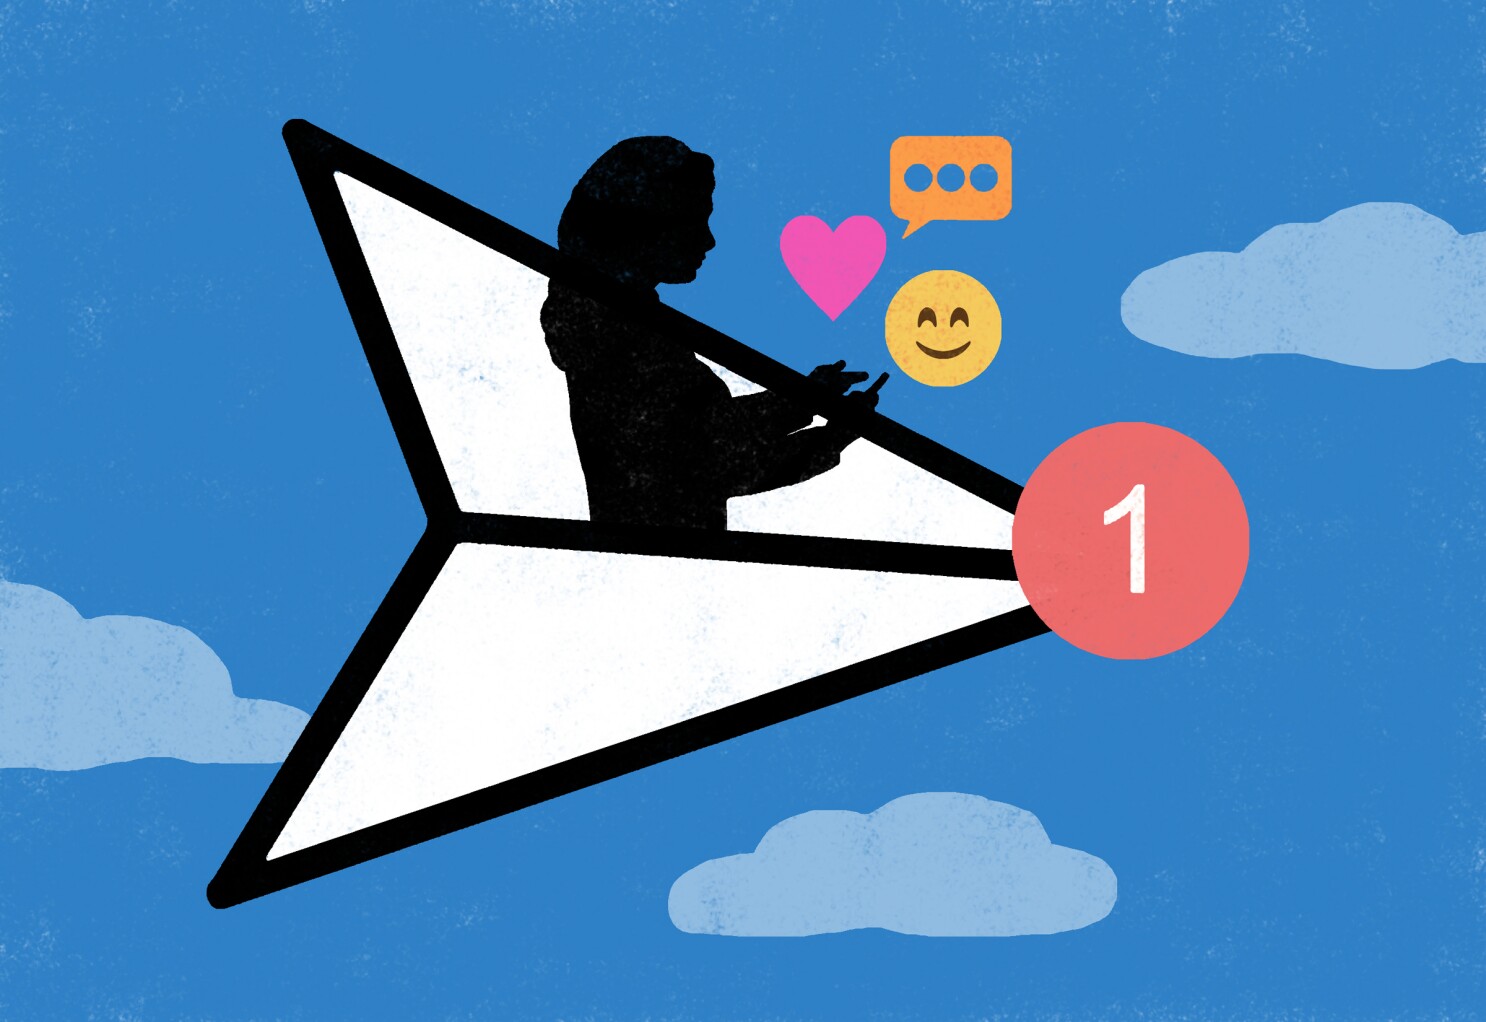 Internet dating: 10 things I’ve learned from looking for love online